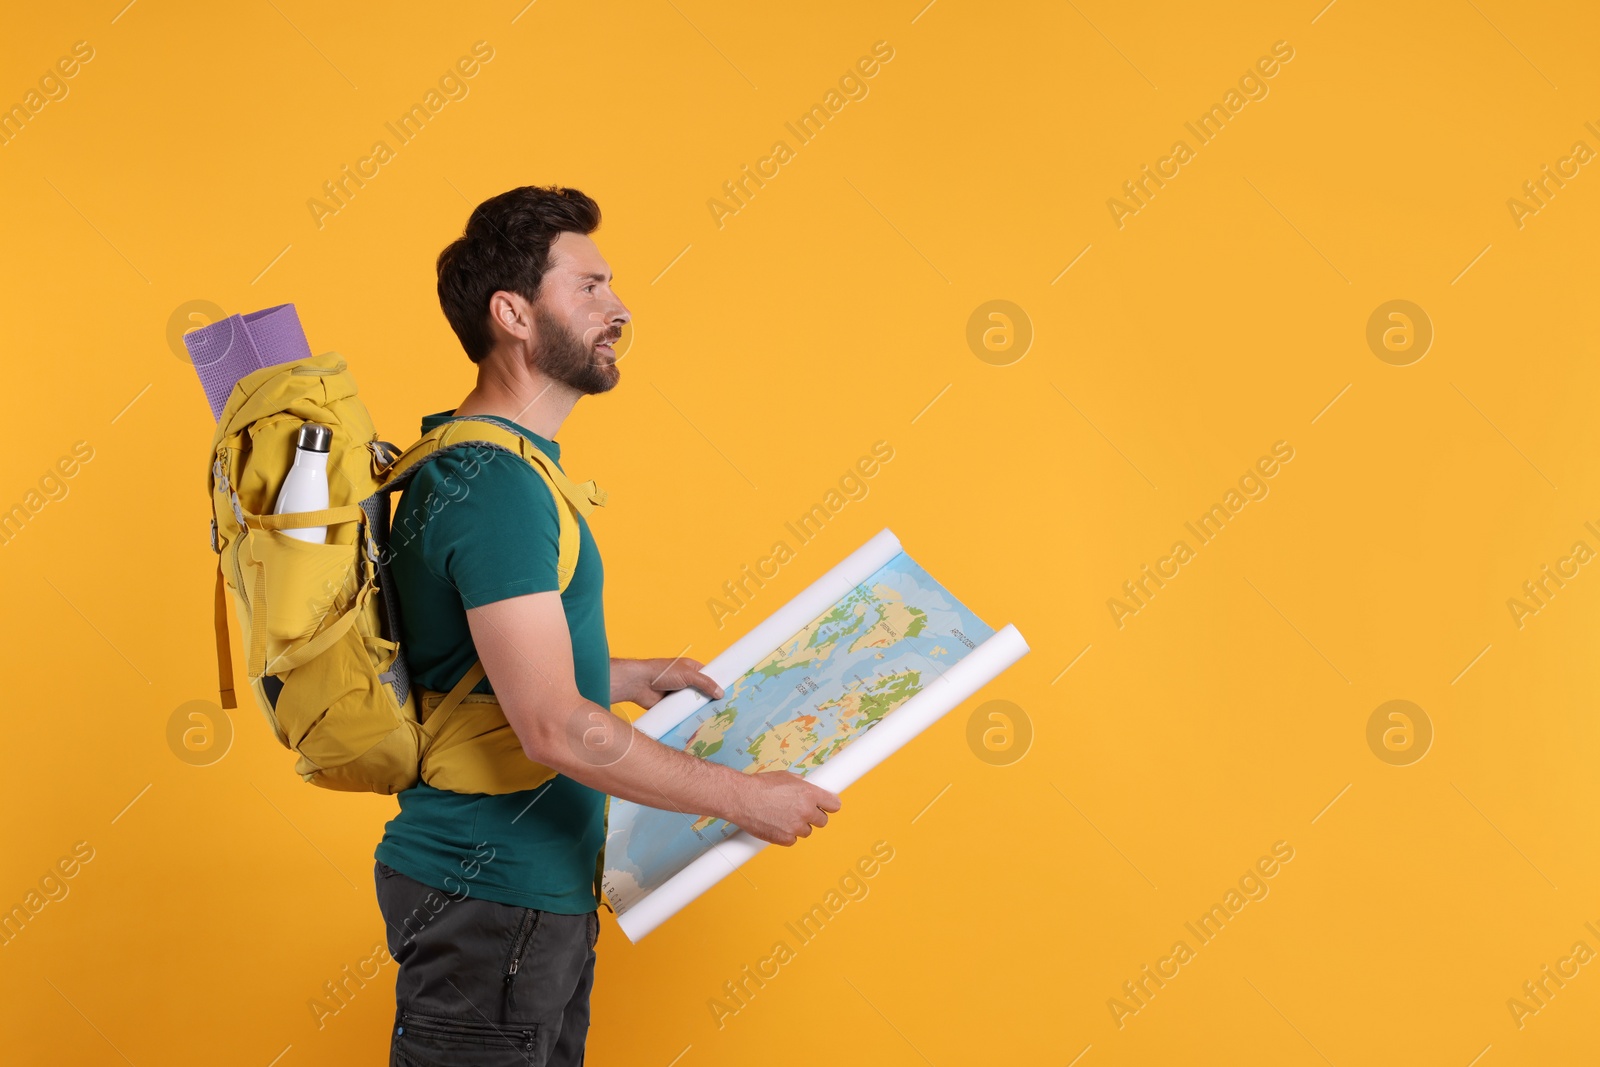 Photo of Happy man with backpack and map on orange background, space for text. Active tourism